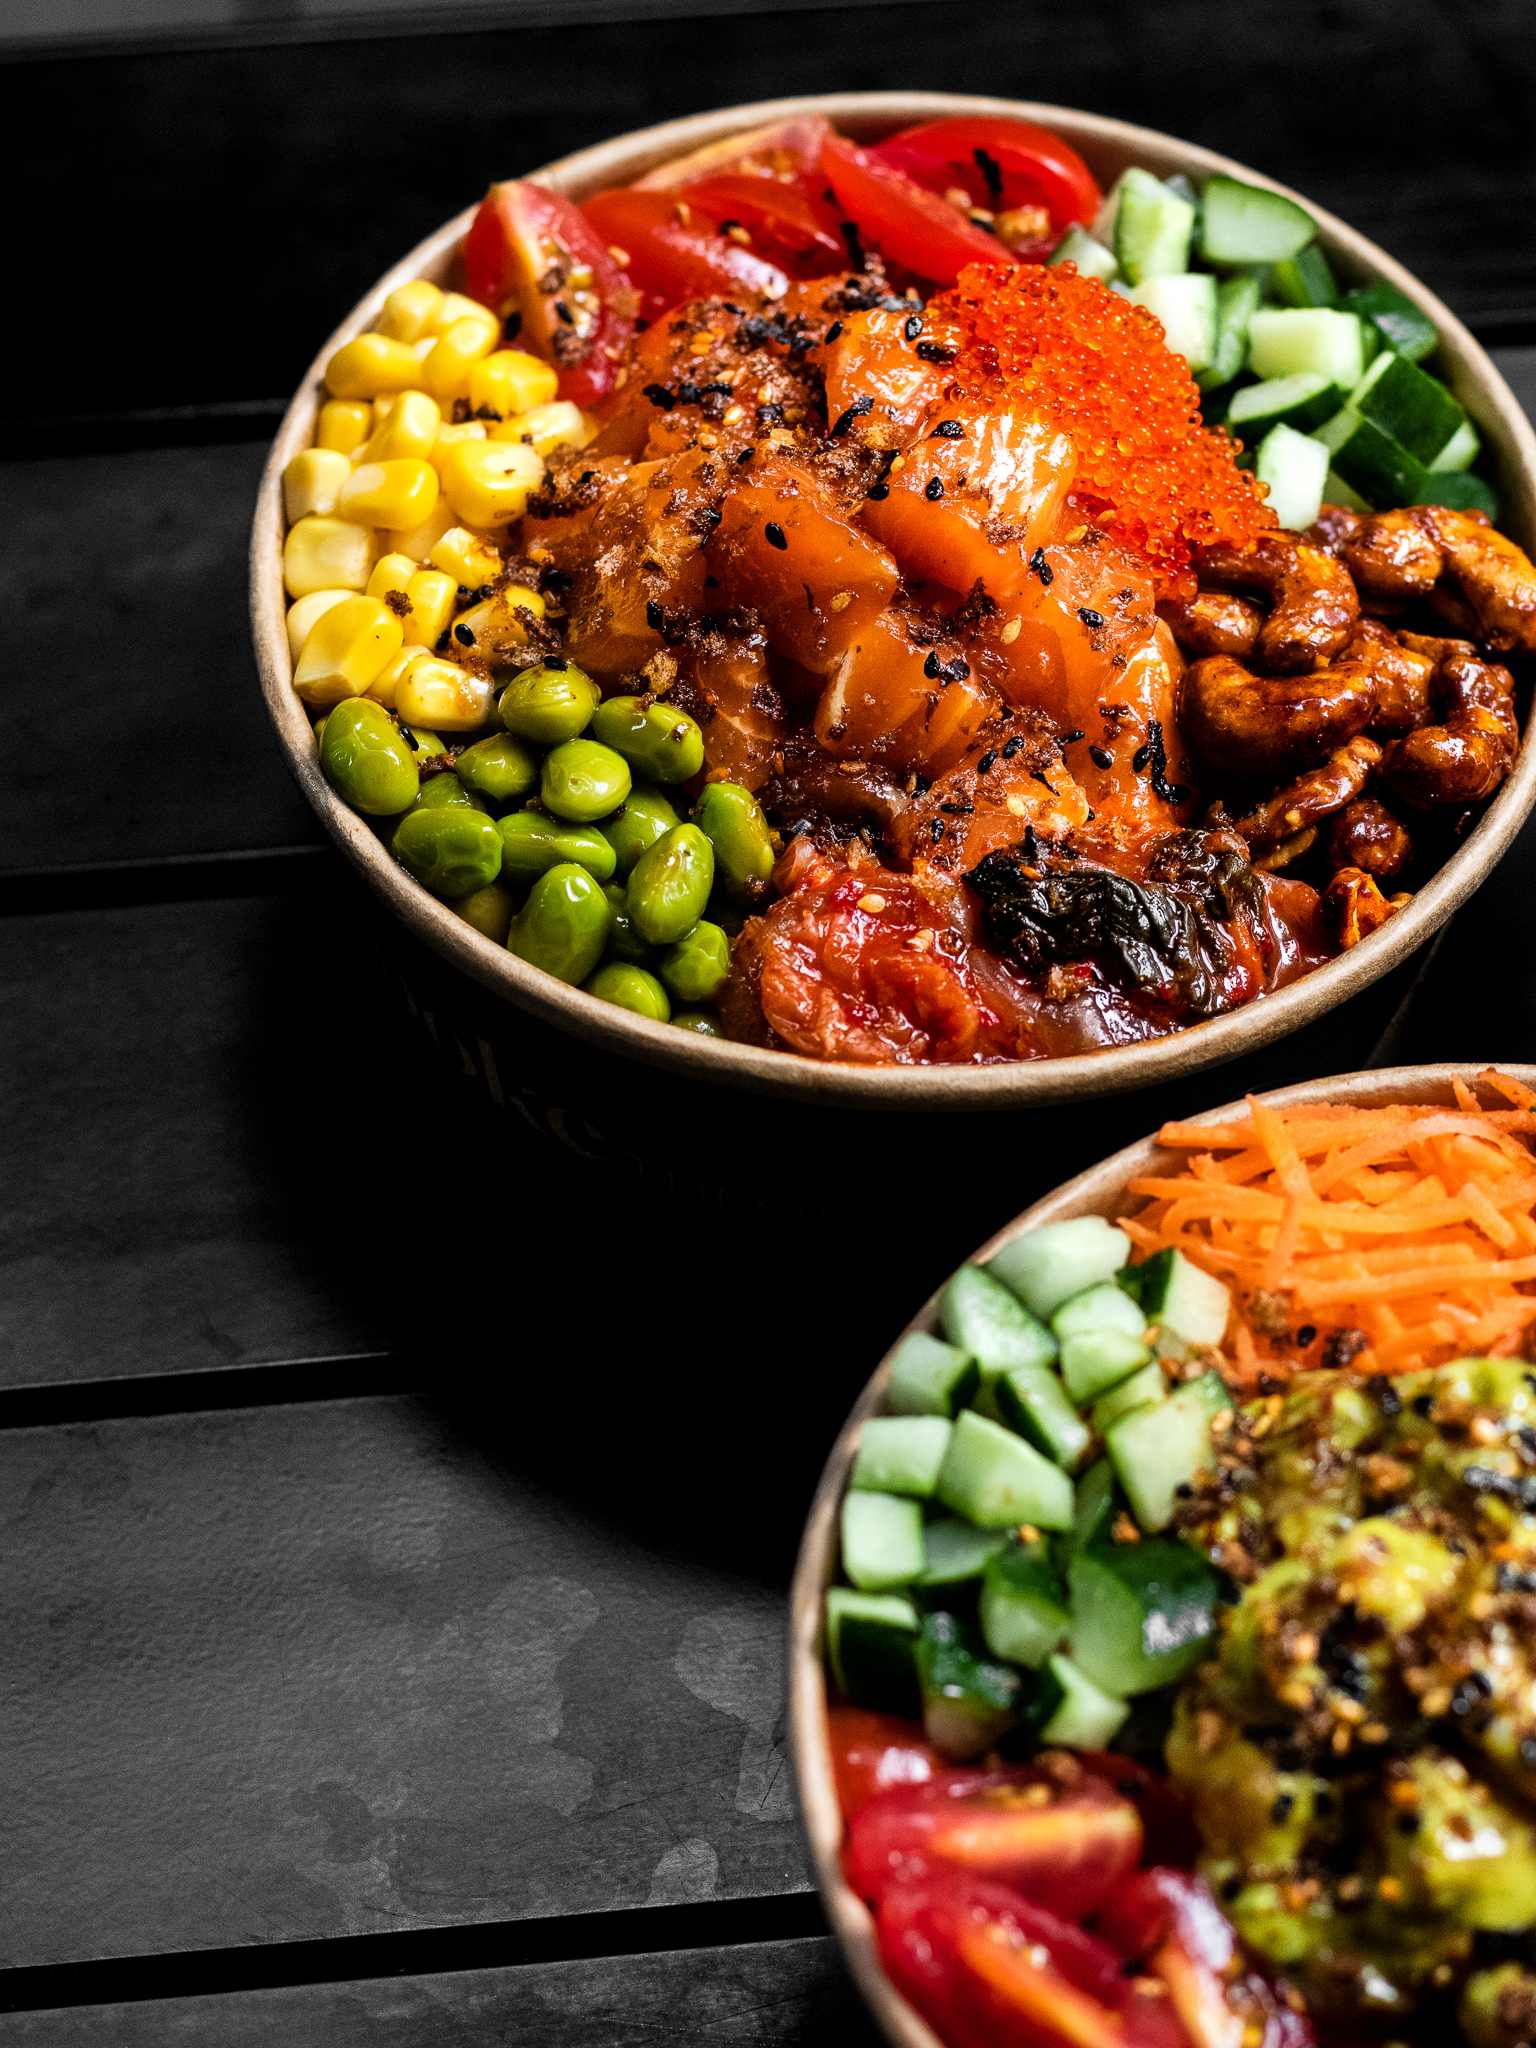 , Poke Theory’s biggest outlet is opening in July with more healthy meal options